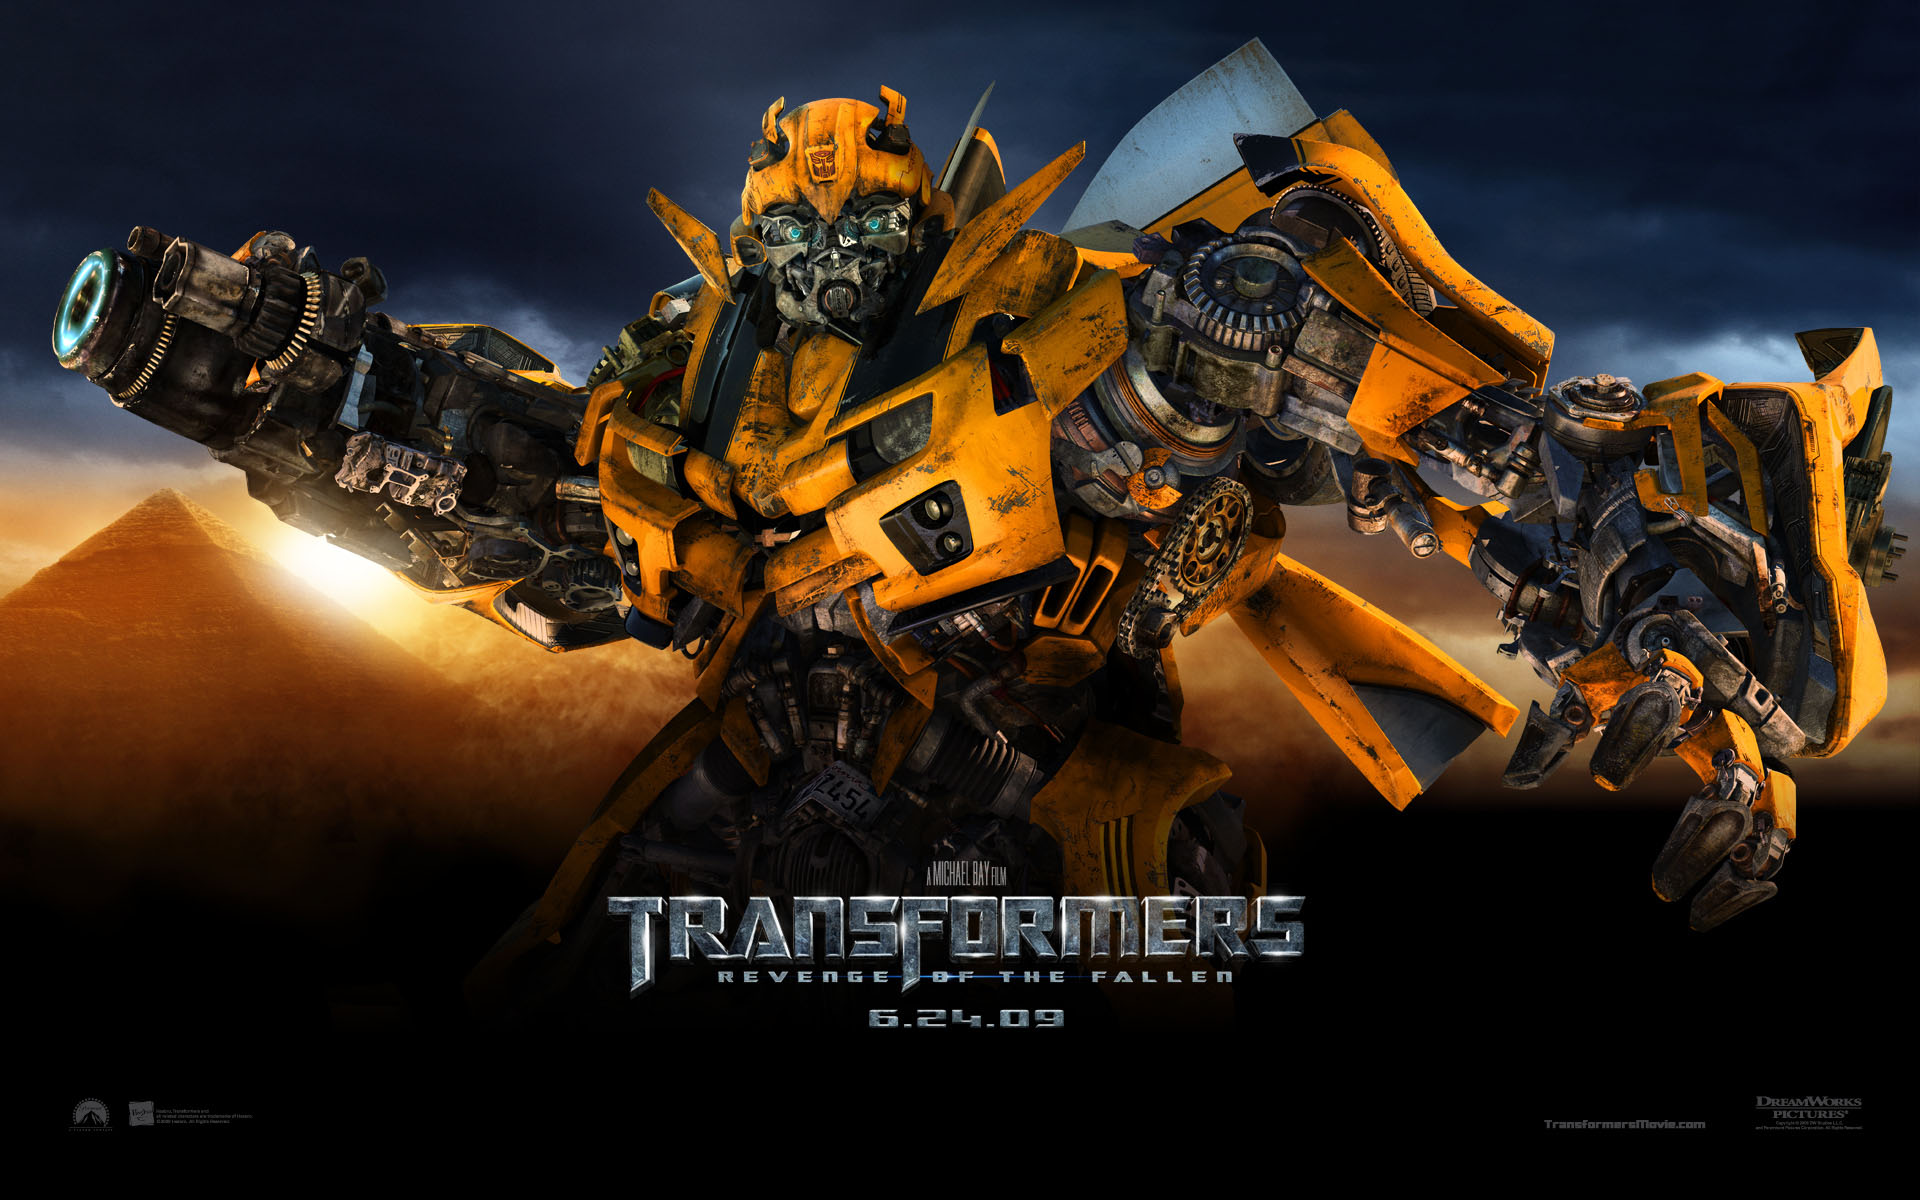 Download High quality Transformers 2 Revenge Of The Fallen wallpaper / Movies / 1920x1200